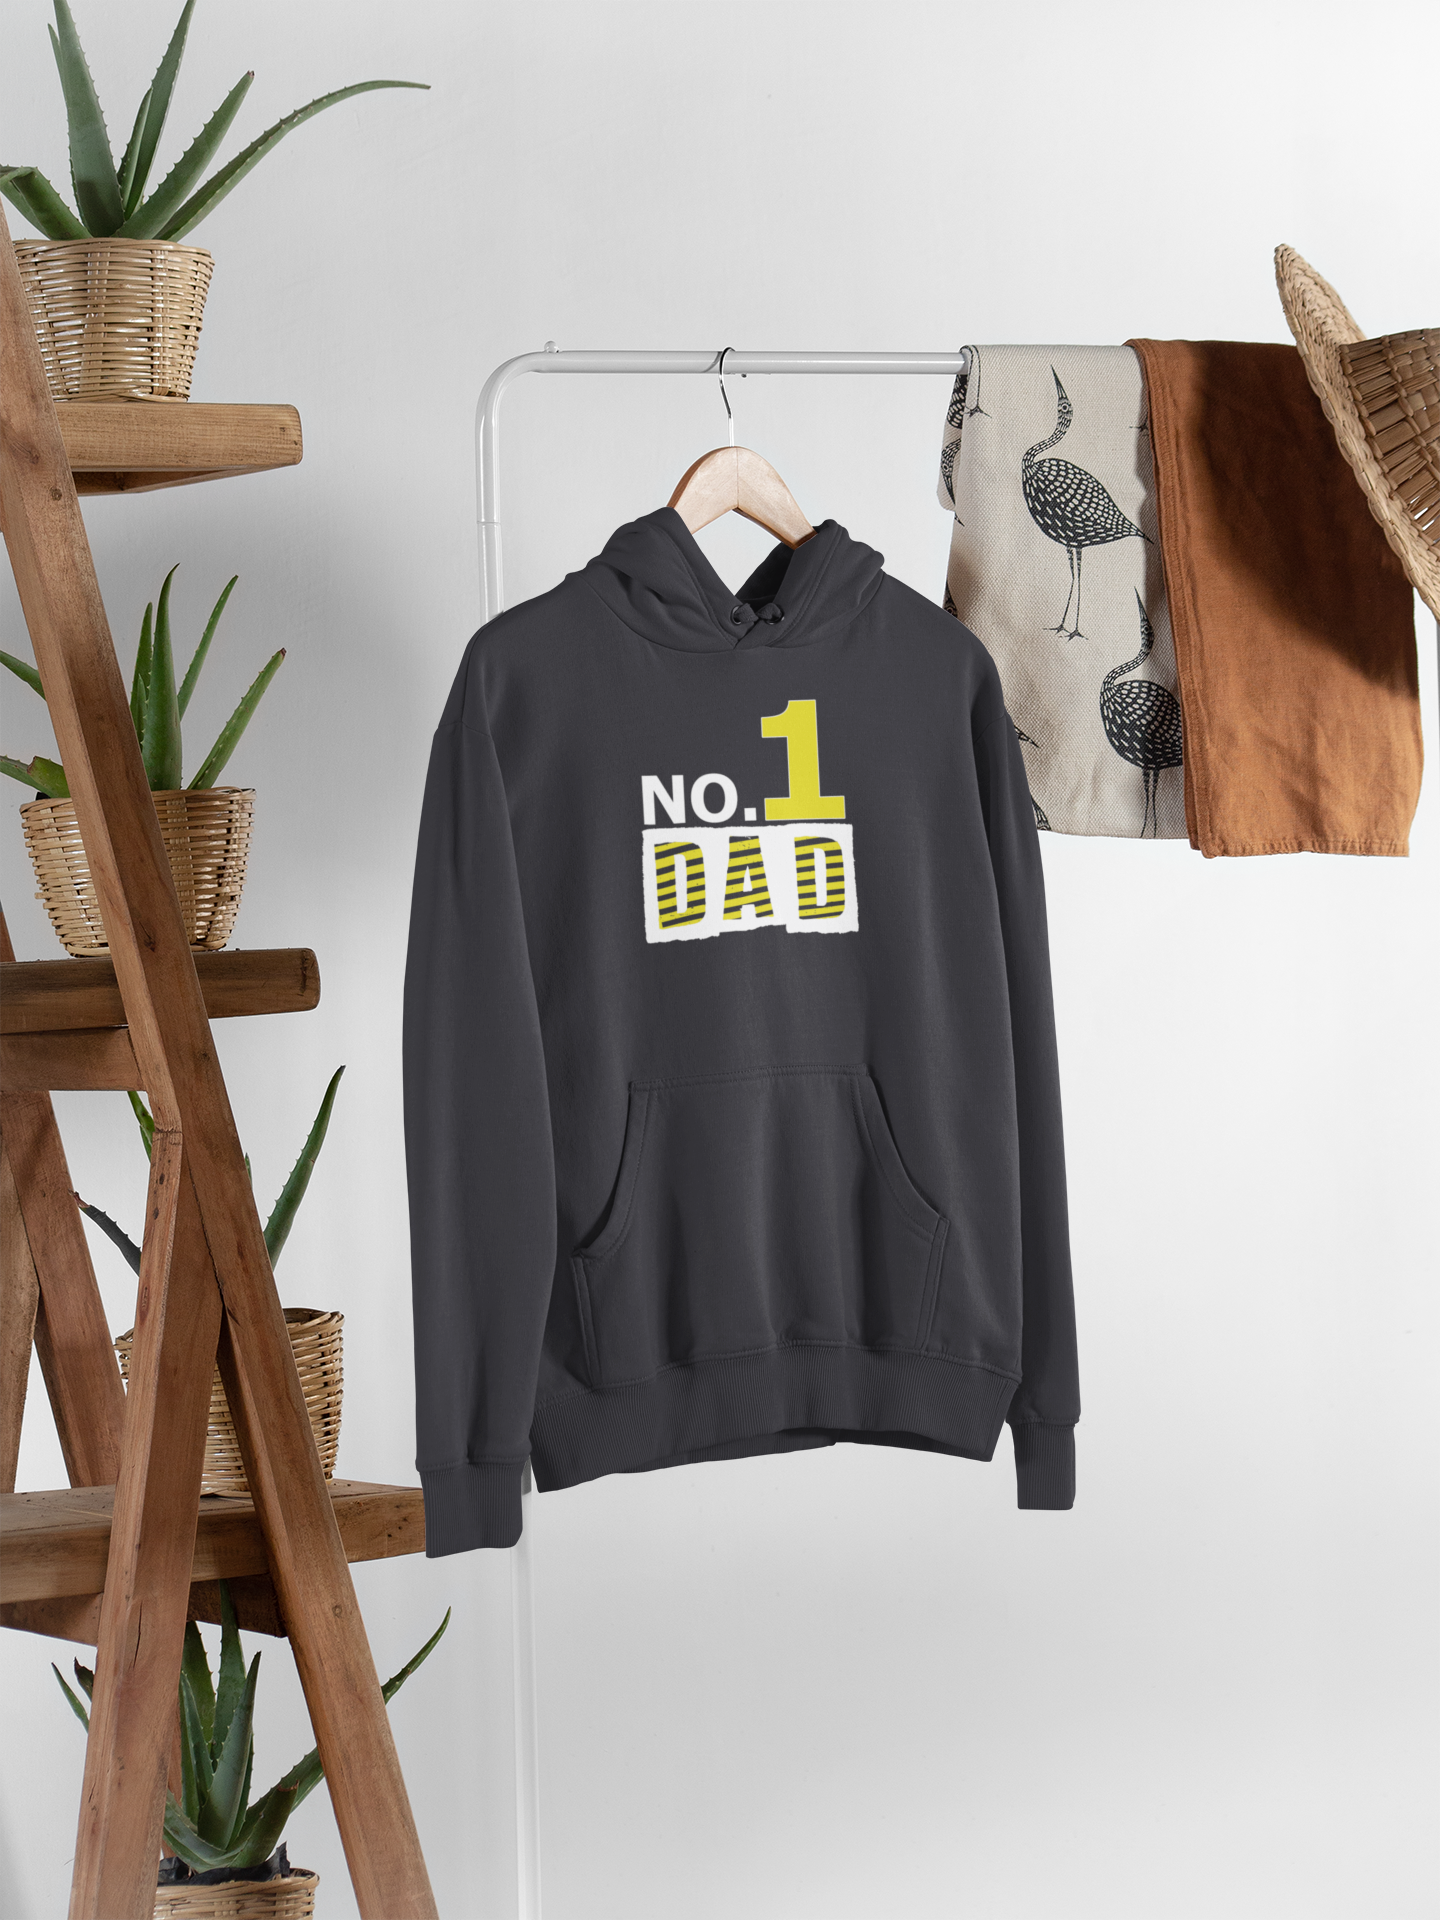 No 1 Dad Father and Son Black Matching Hoodies- FunkyTeesClub